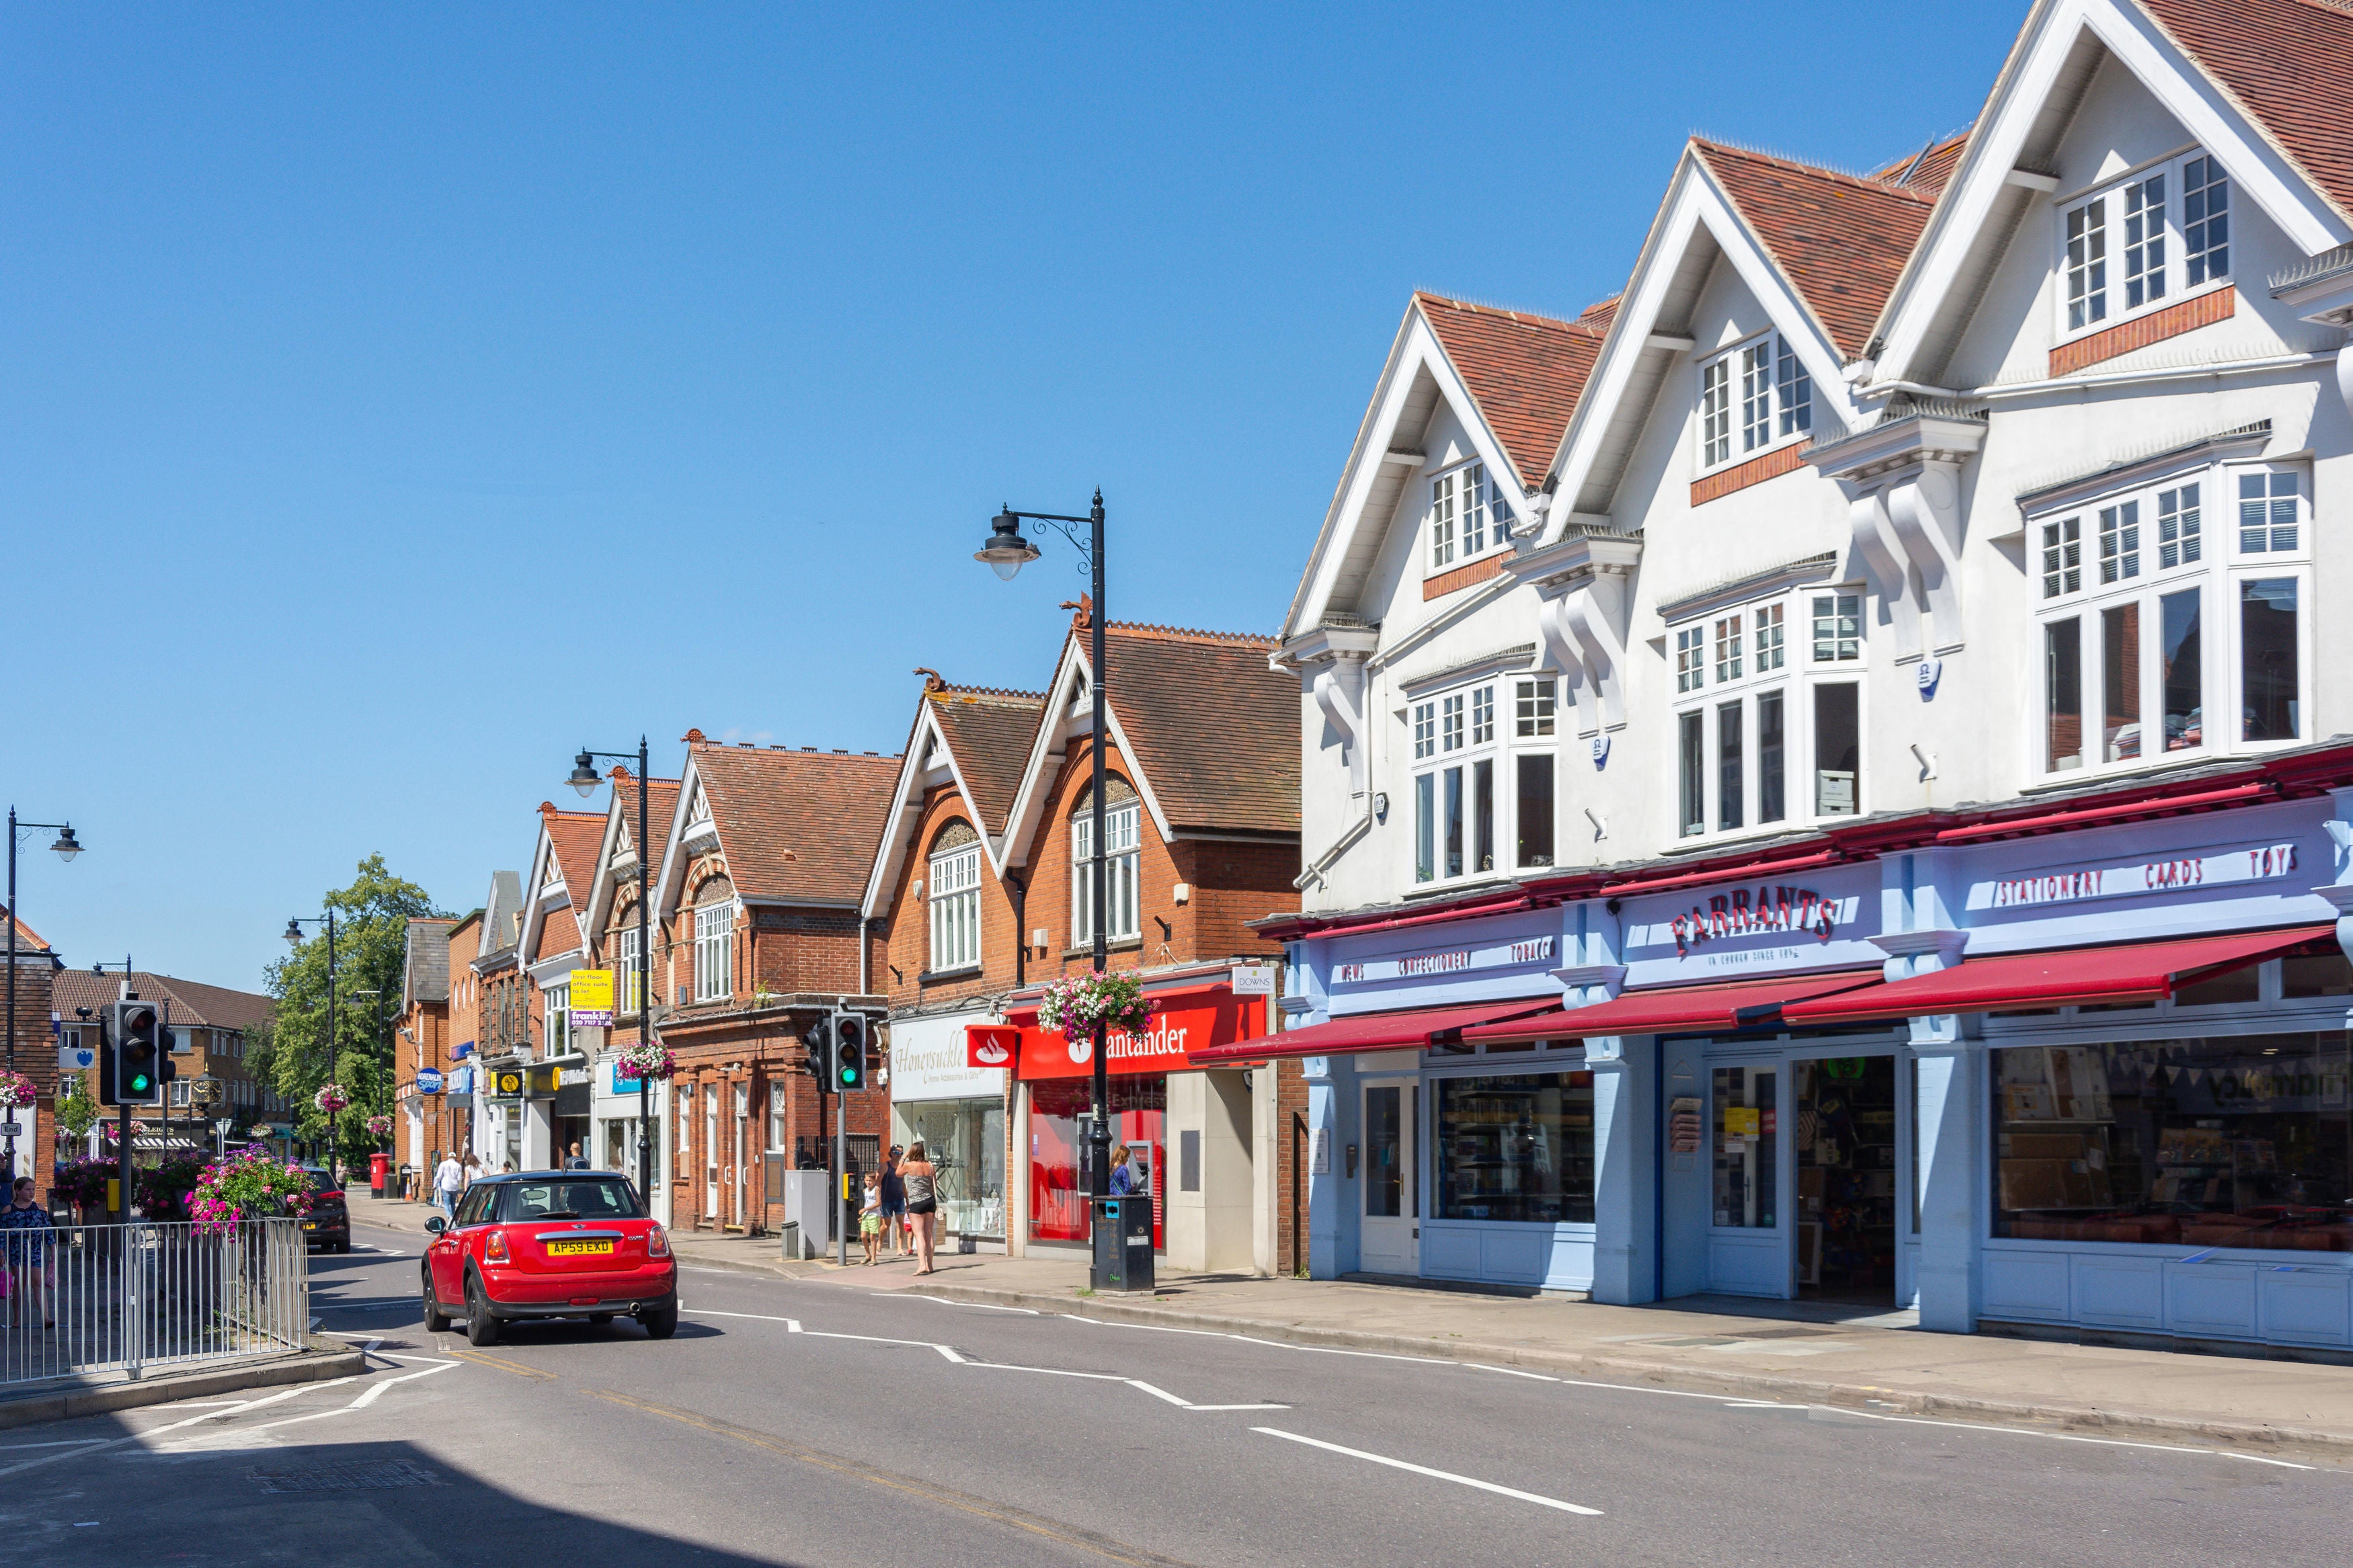 Farrants on High Street, Cobham, Surrey, is facing racism allegations